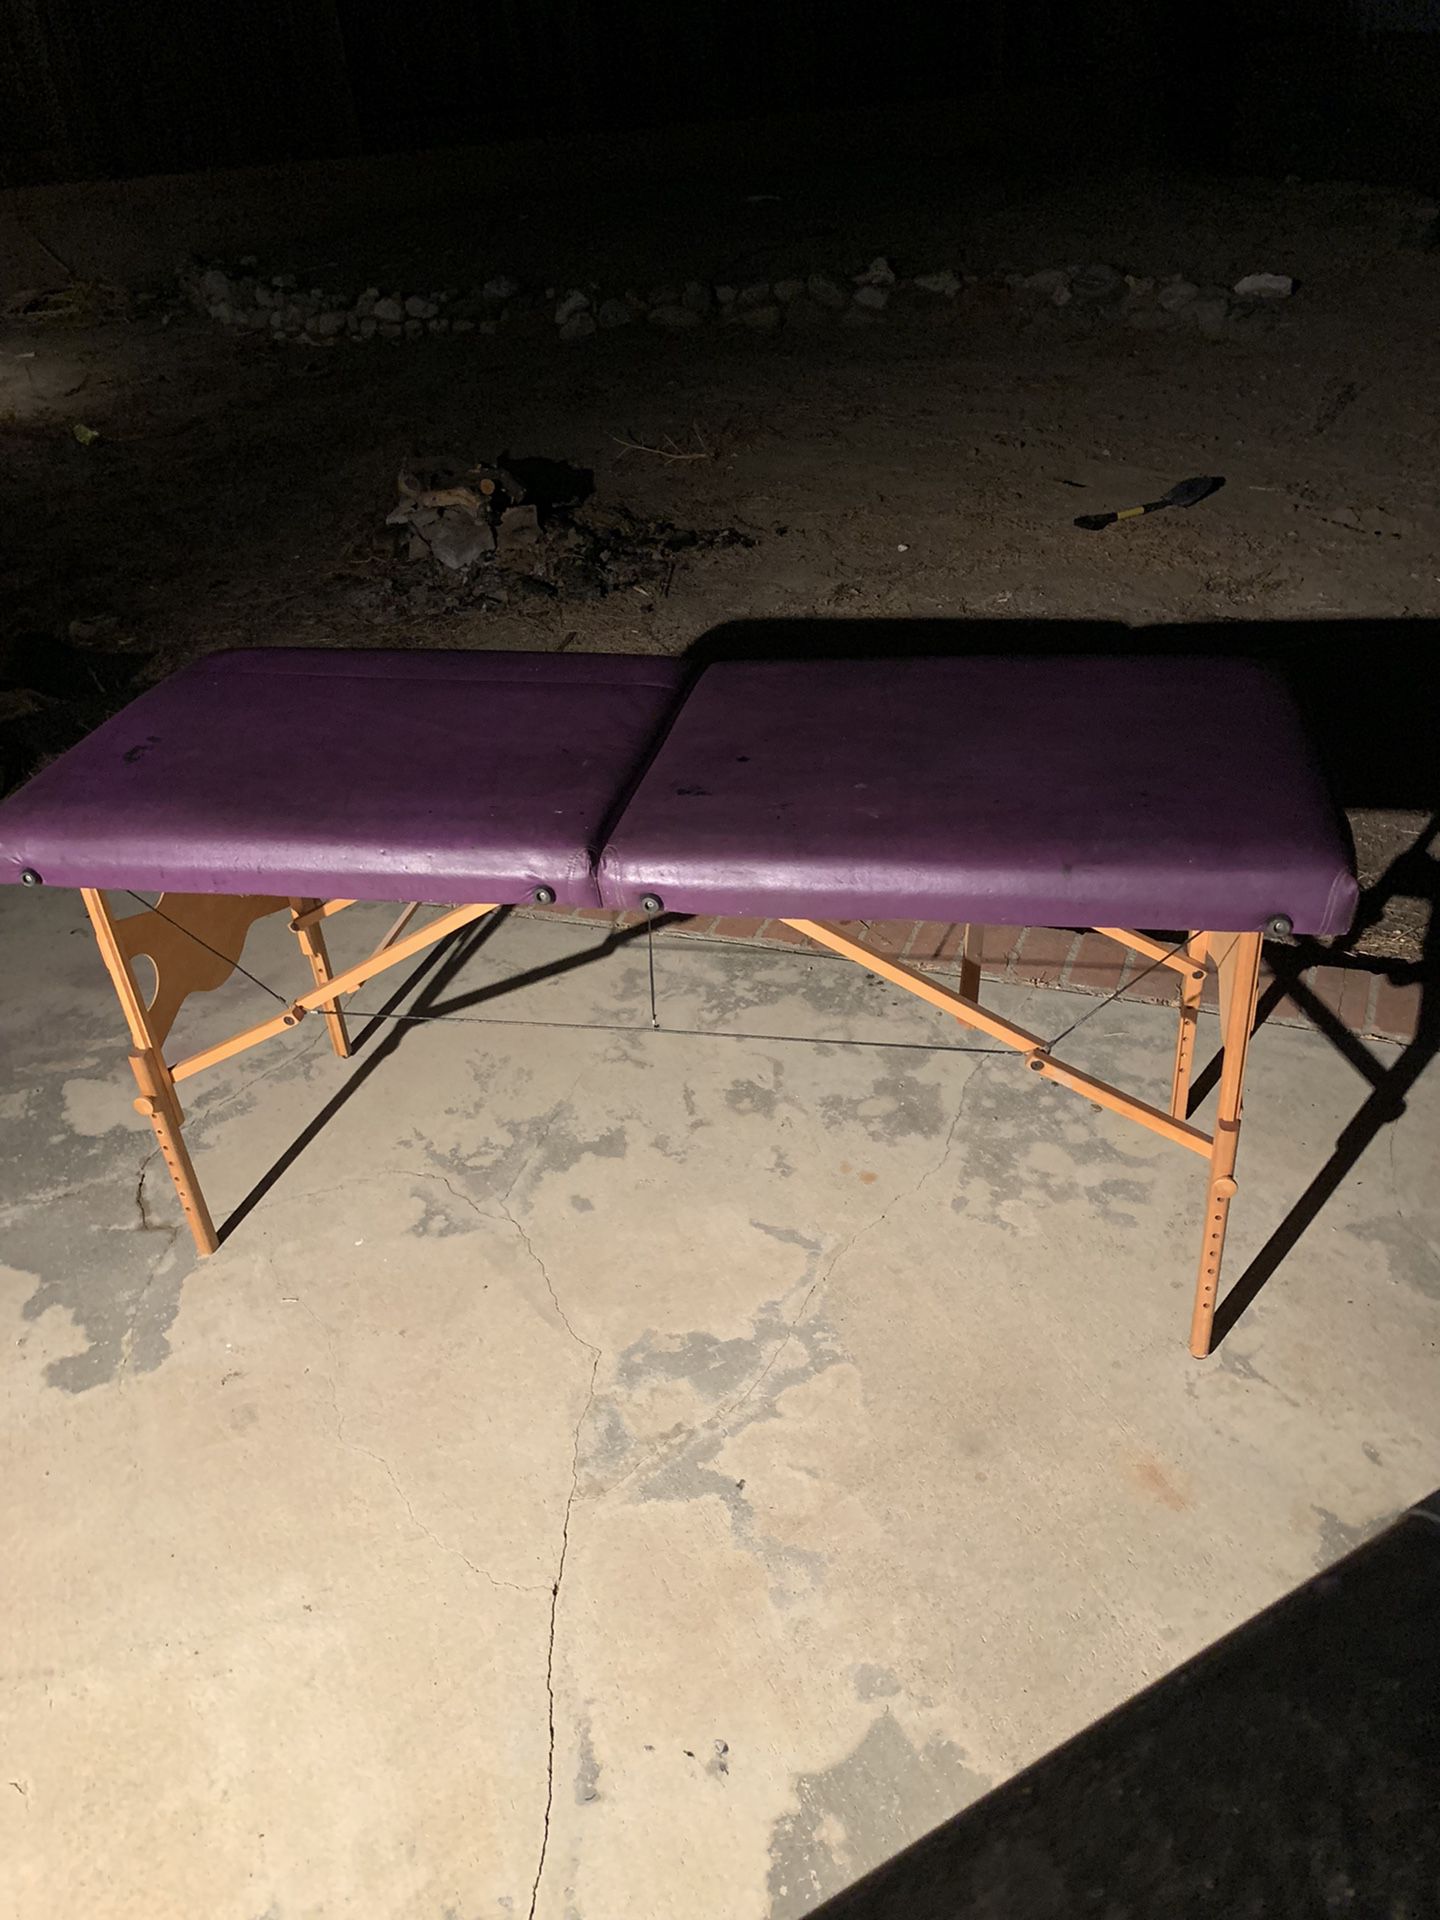 Collapsible Massage Table